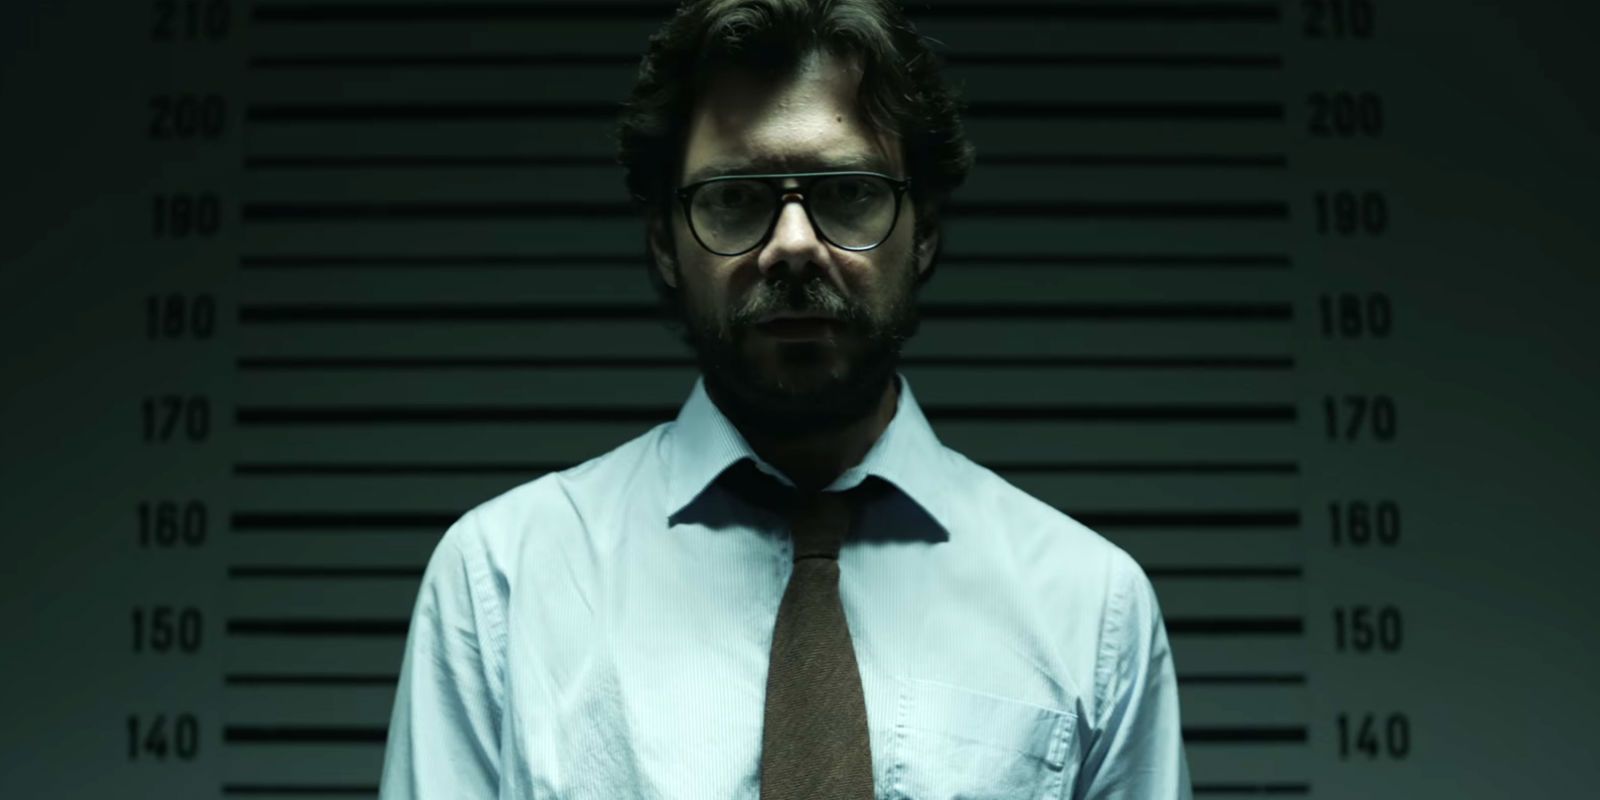 Money Heist What Your Favorite Character Says About You